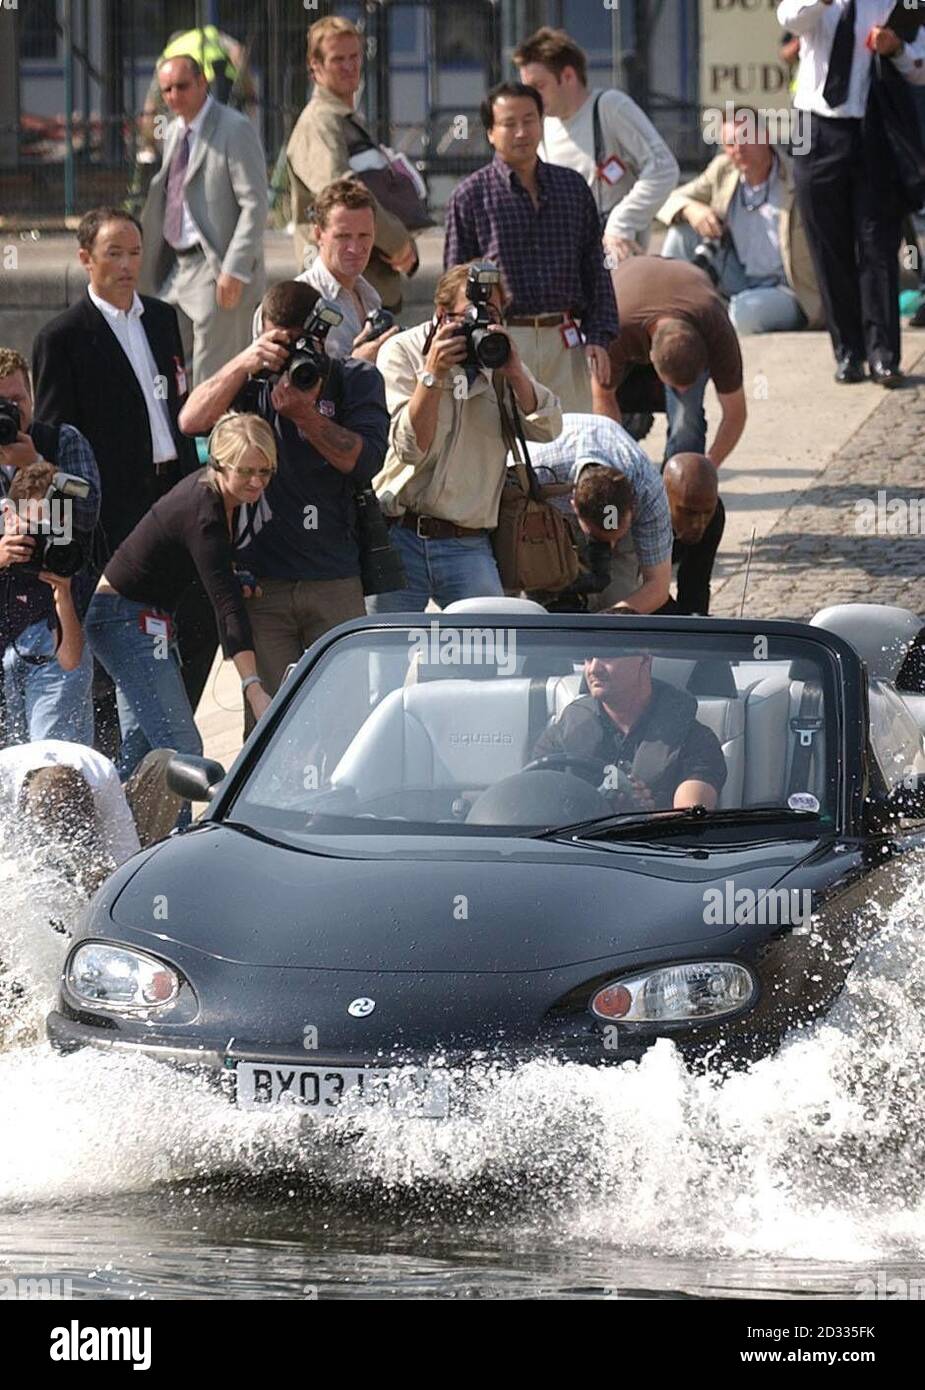 The ultimate 'boy's toy' - a high-speed land and water vehicle -  launched on the River Thames. The Aquada is designed to reach speeds of 100mph on land and over 30mph on water and can switch between the two surfaces at the switch of a button. Gibbs Technologies, who designed it, says that no other road-legal amphibian has managed to exceed 6mph on water. Stock Photo